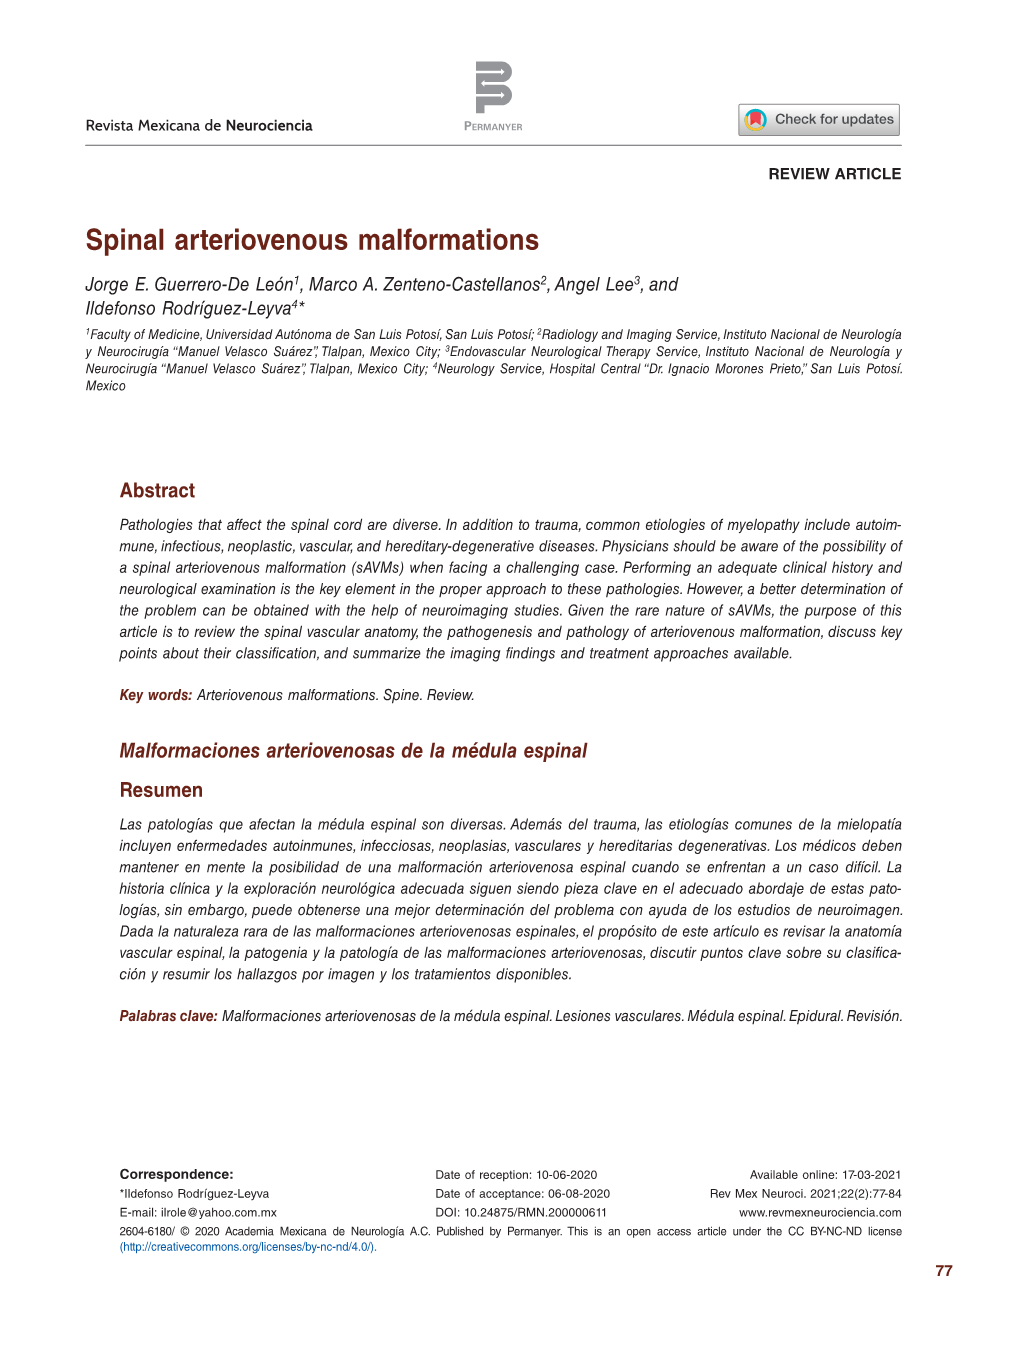 Spinal Arteriovenous Malformations